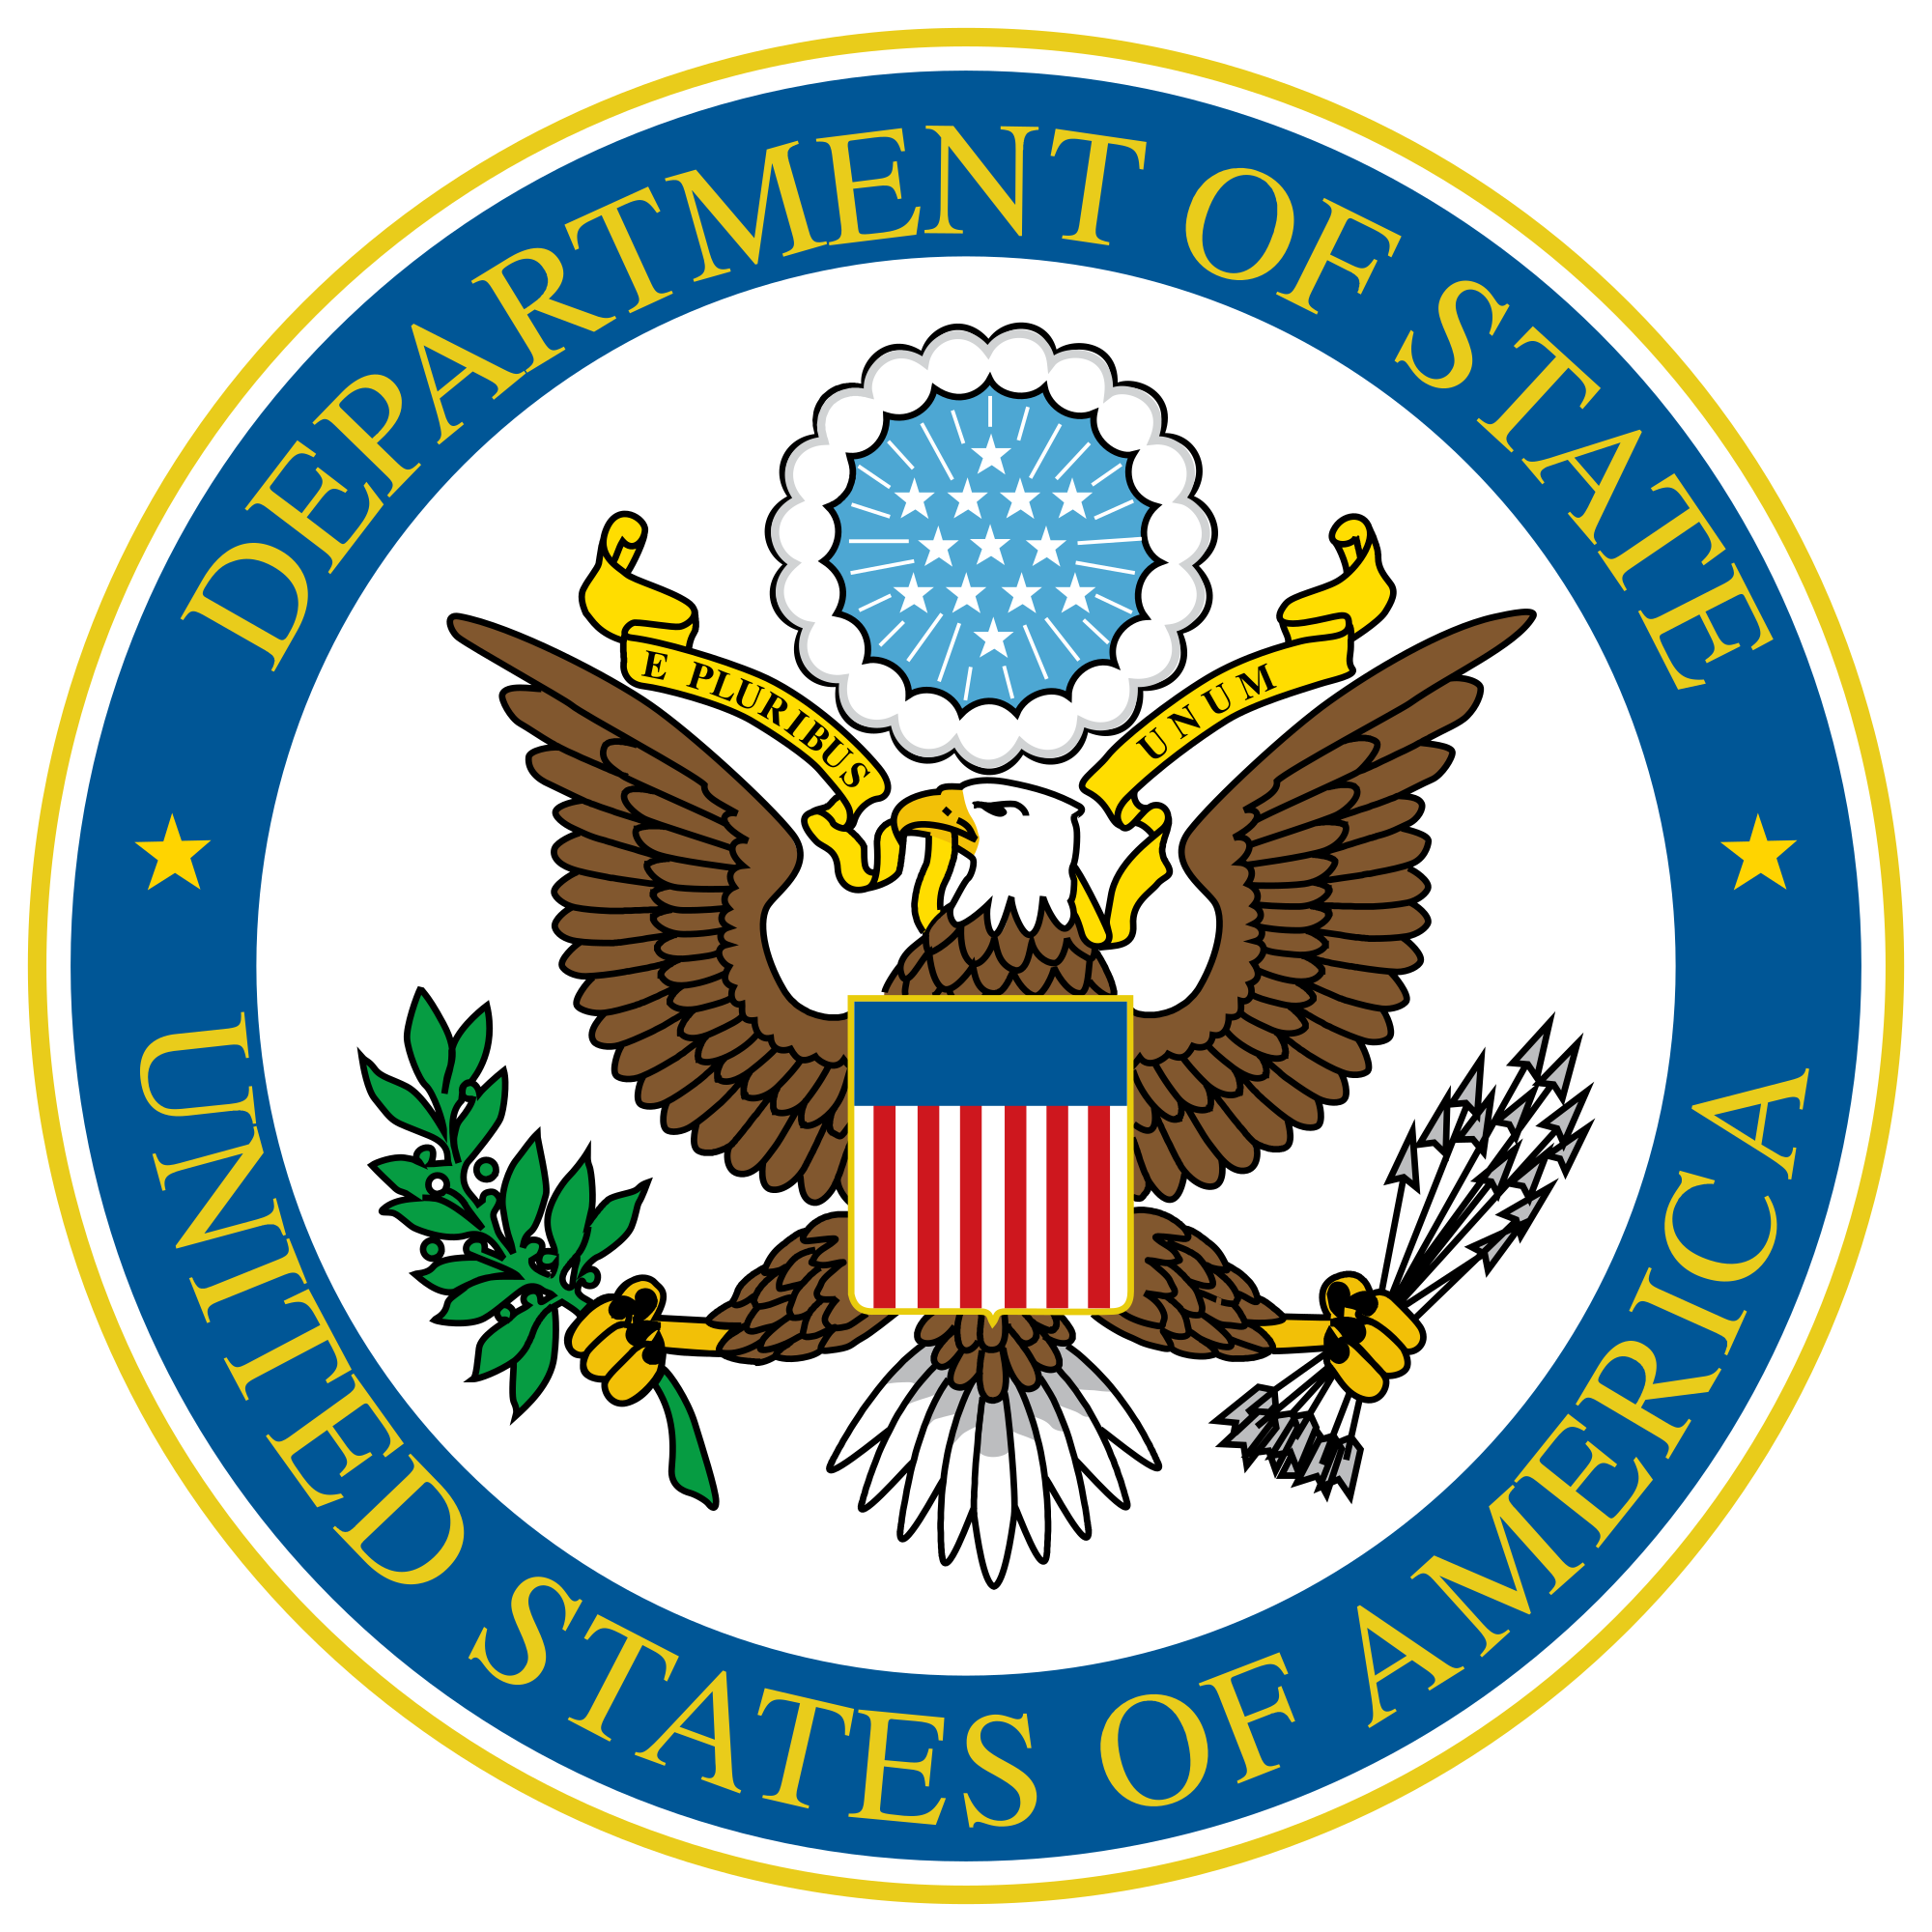 The United States Diplomacy Center